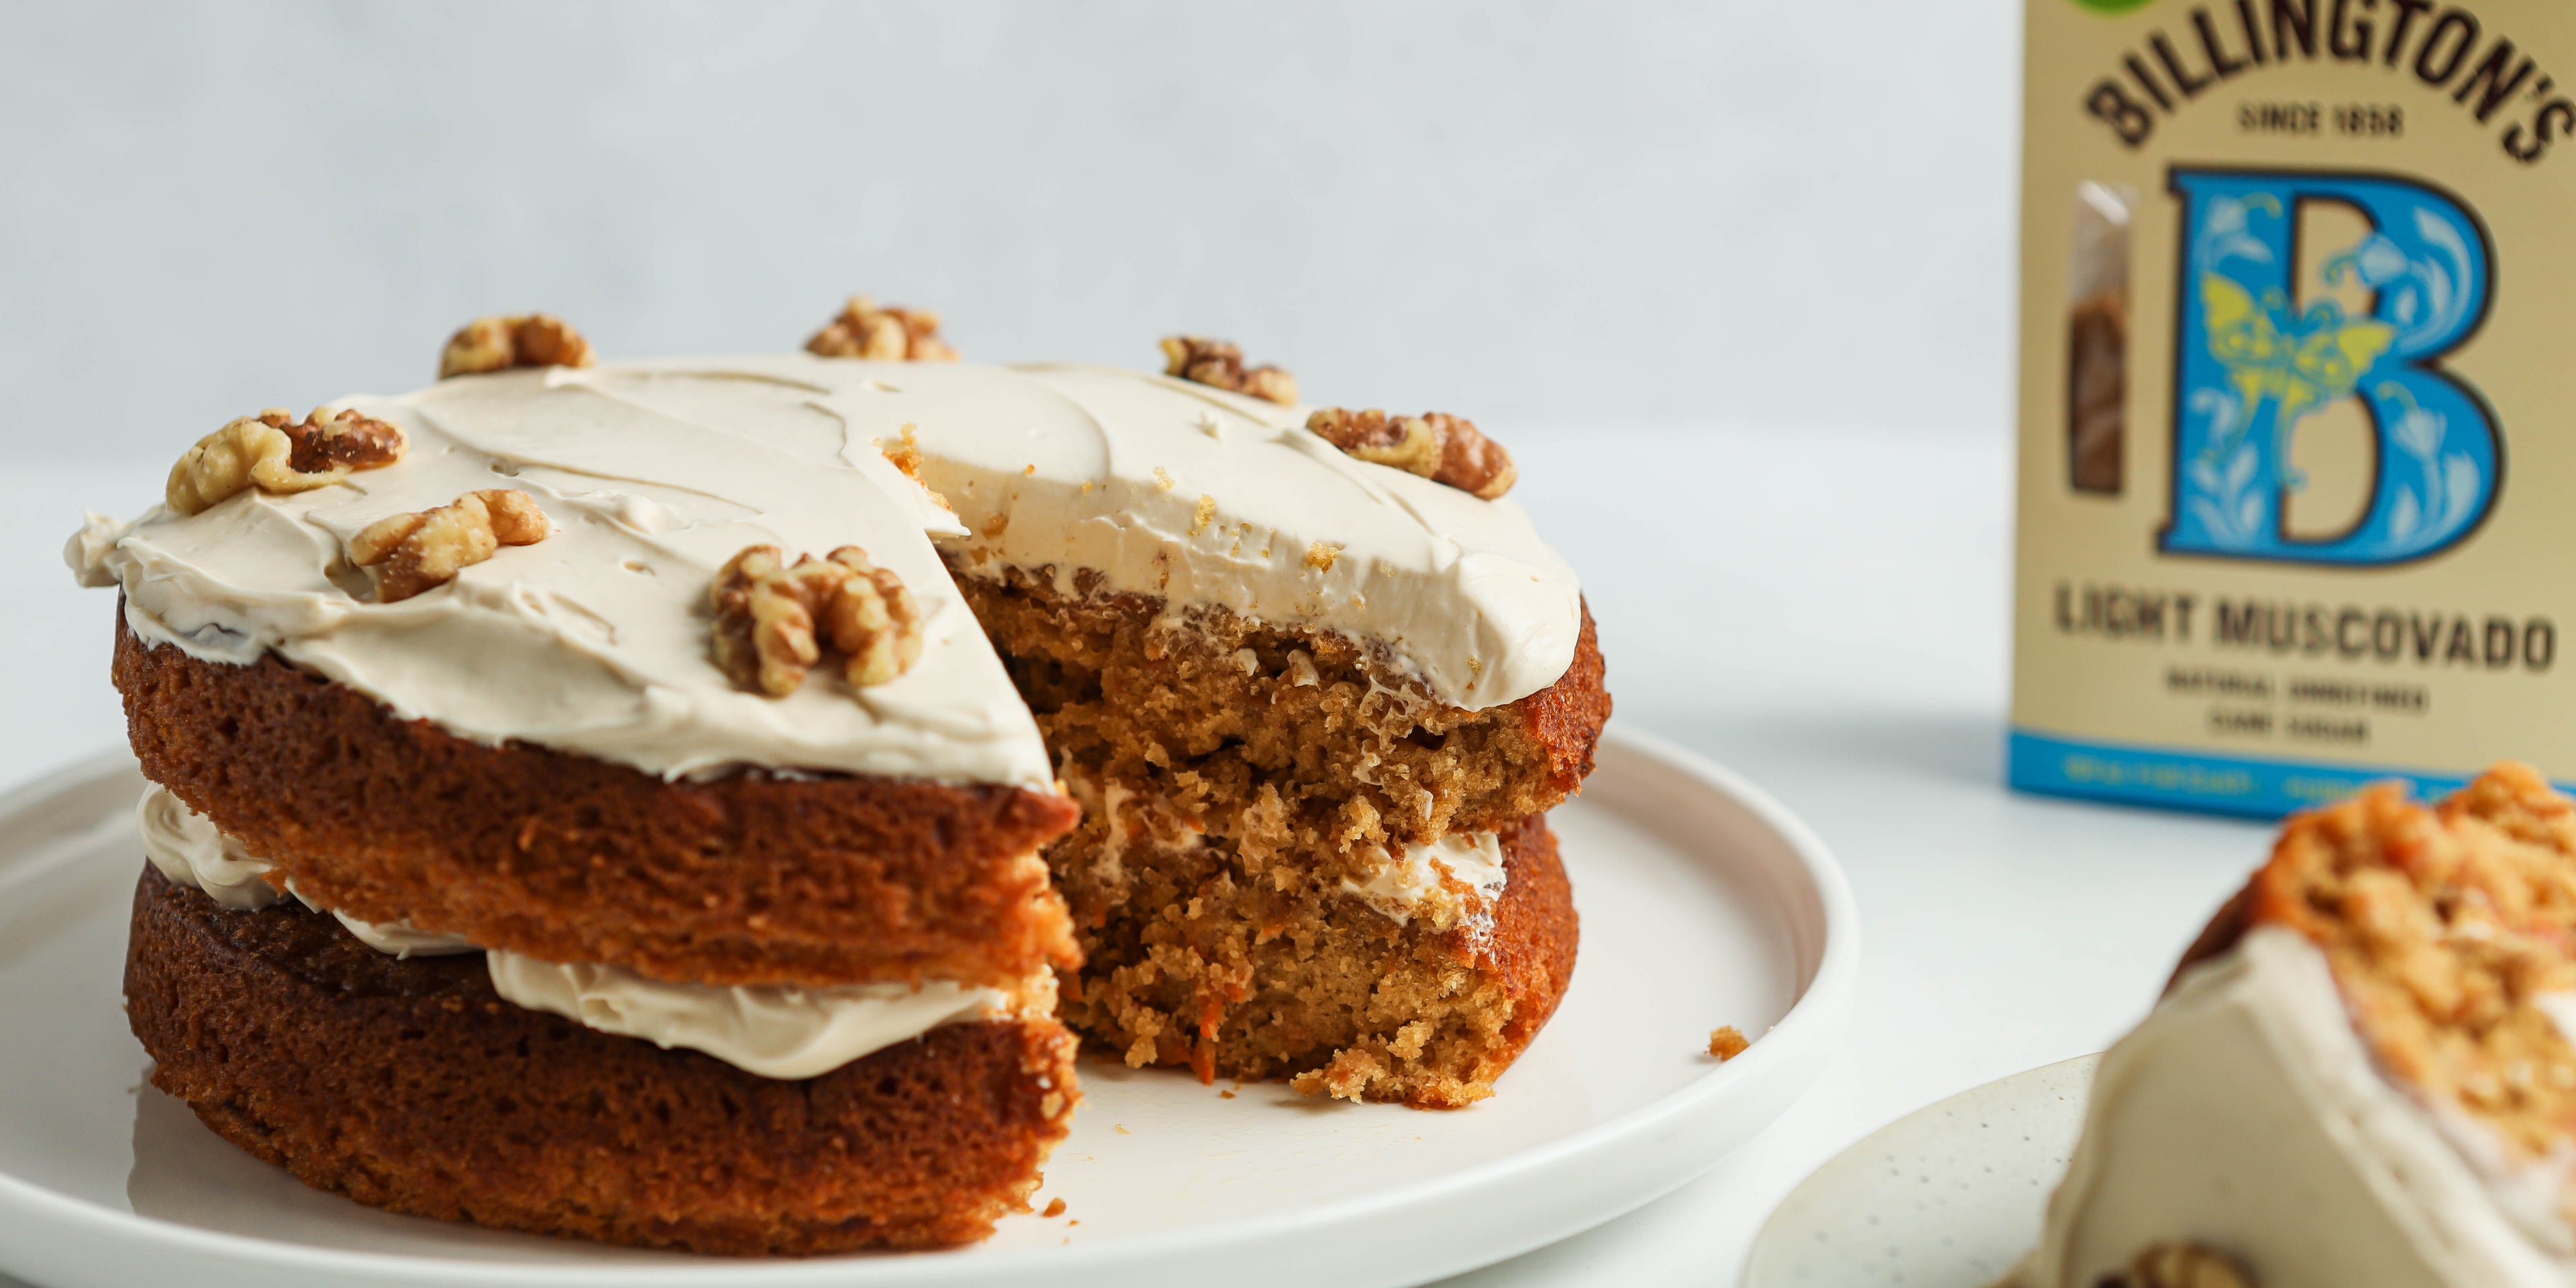 Classic Carrot Cake close up, with a slice cut out of it next to a box of Billington's Light Muscovado Sugar